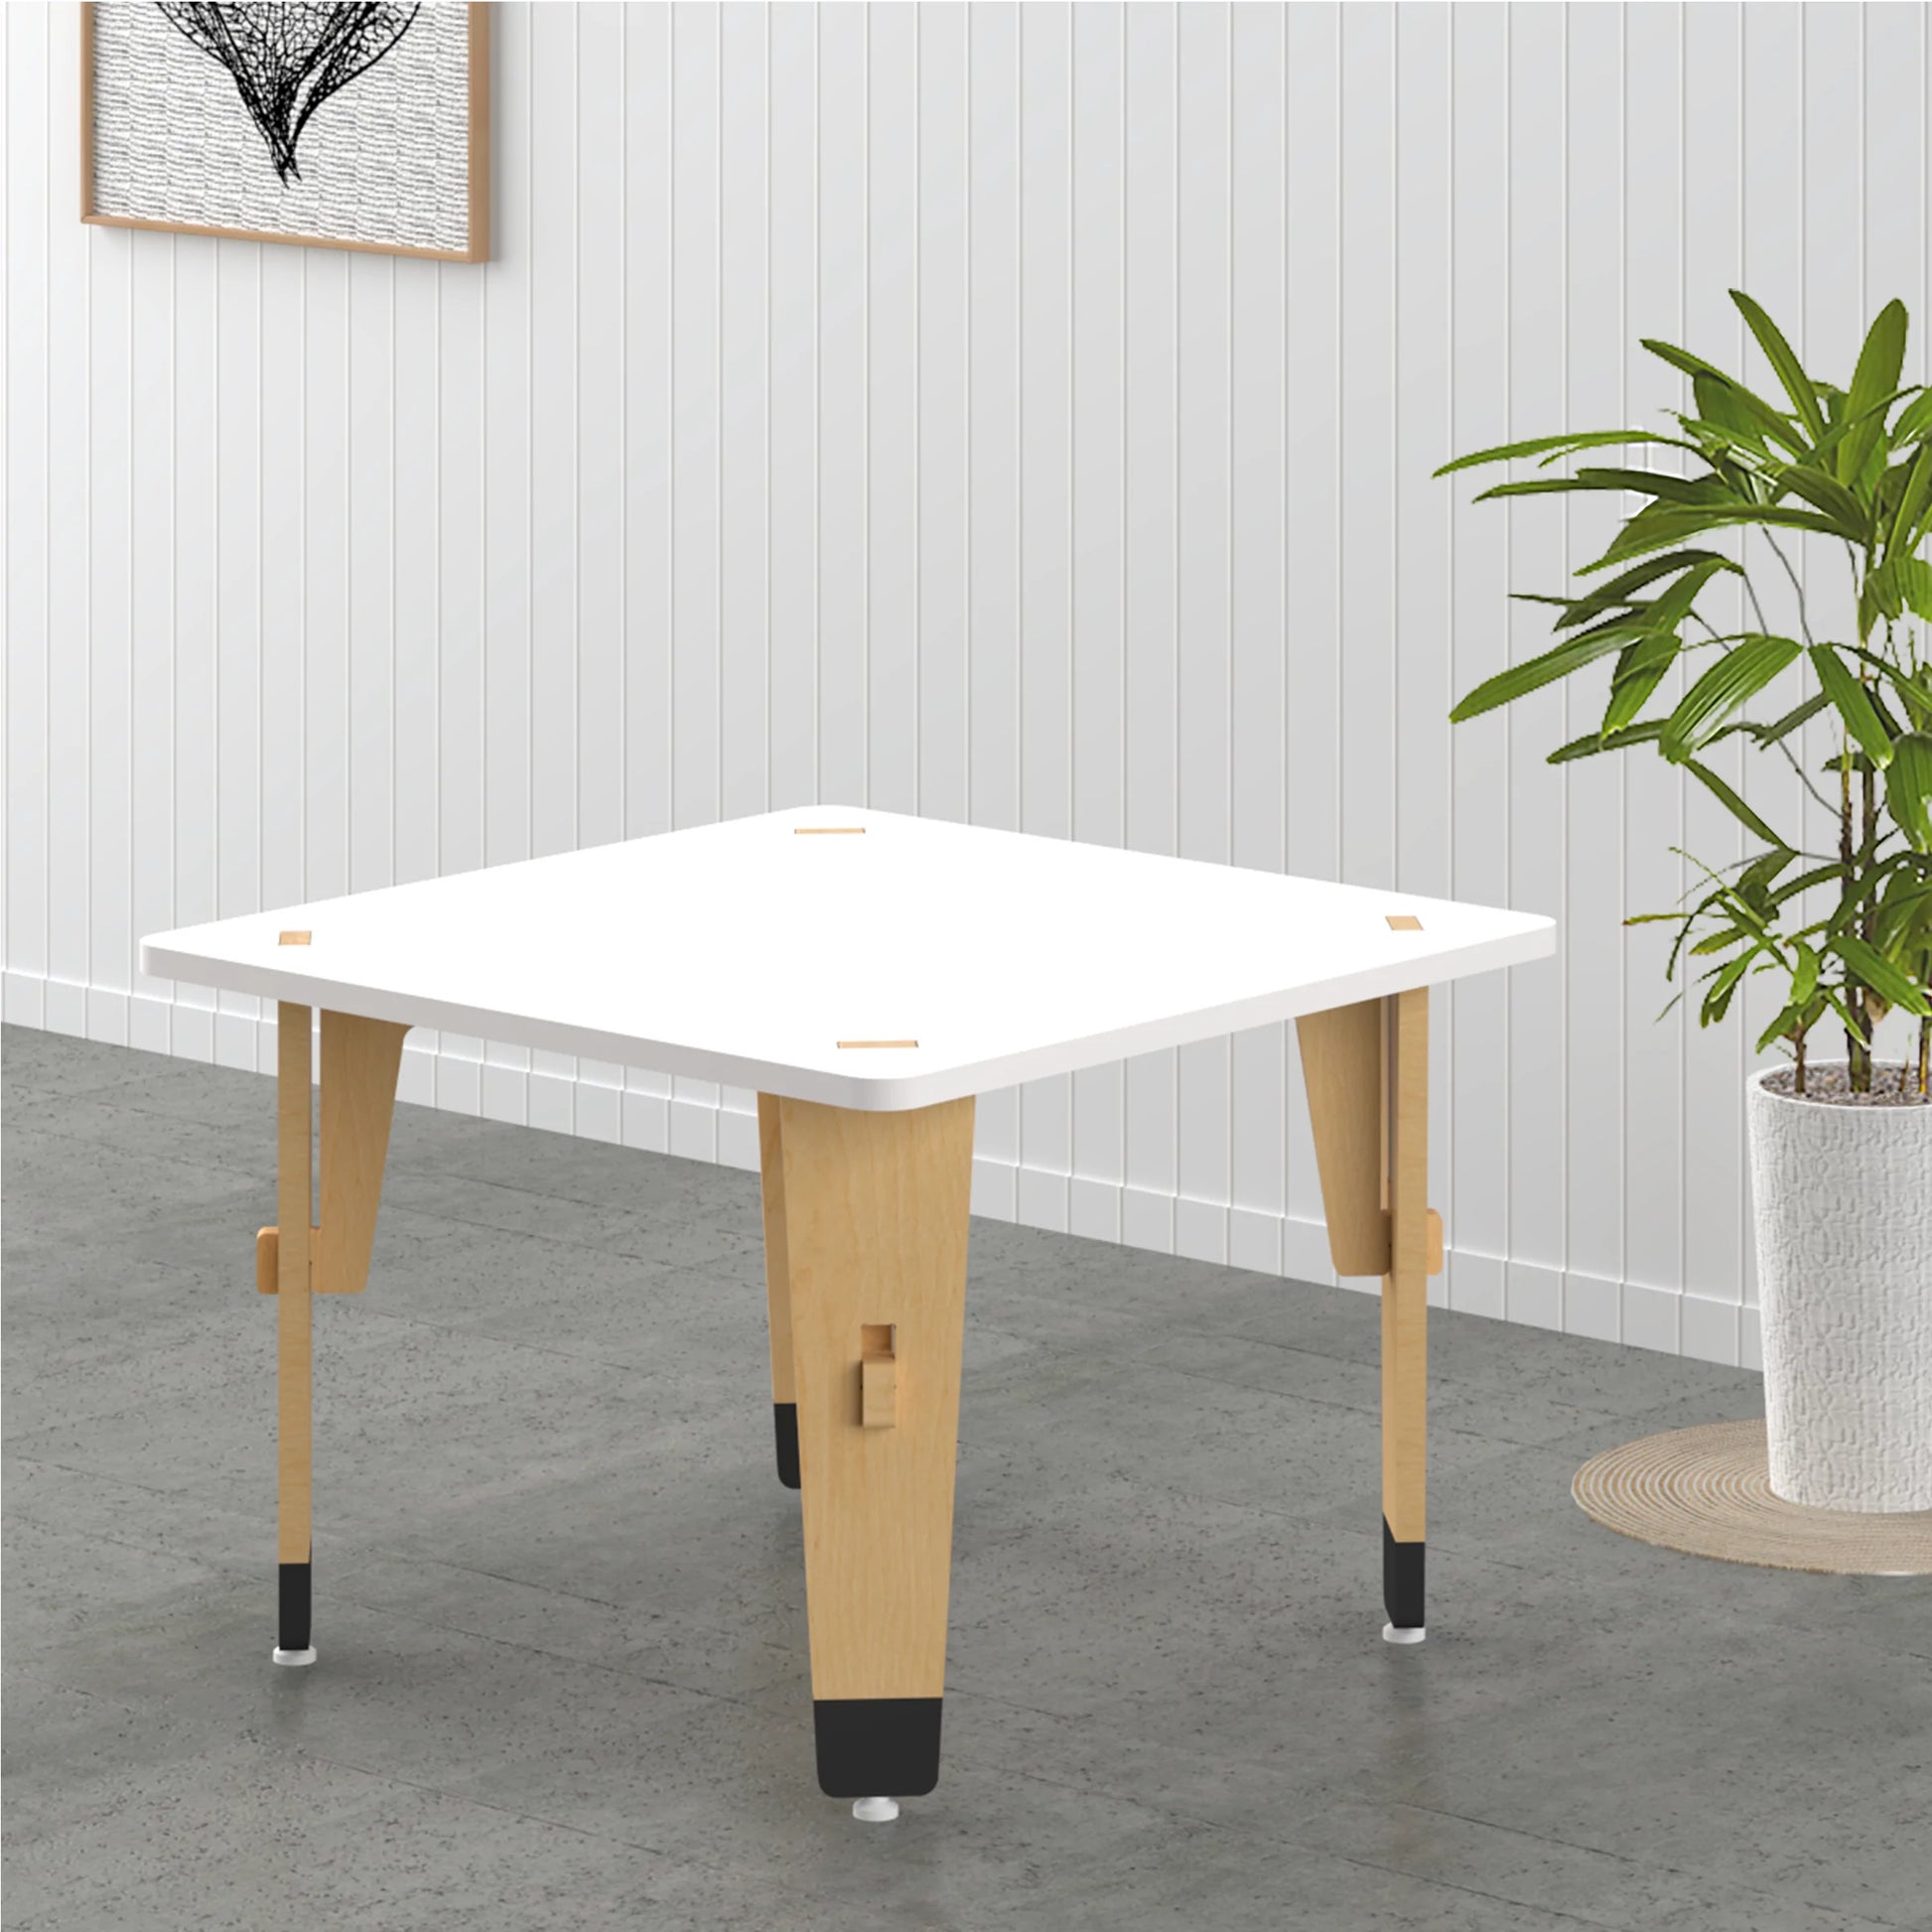 Buy Lime Fig Wooden Table - White (15 Inches) - Learning Furniture - SkilloToys.com